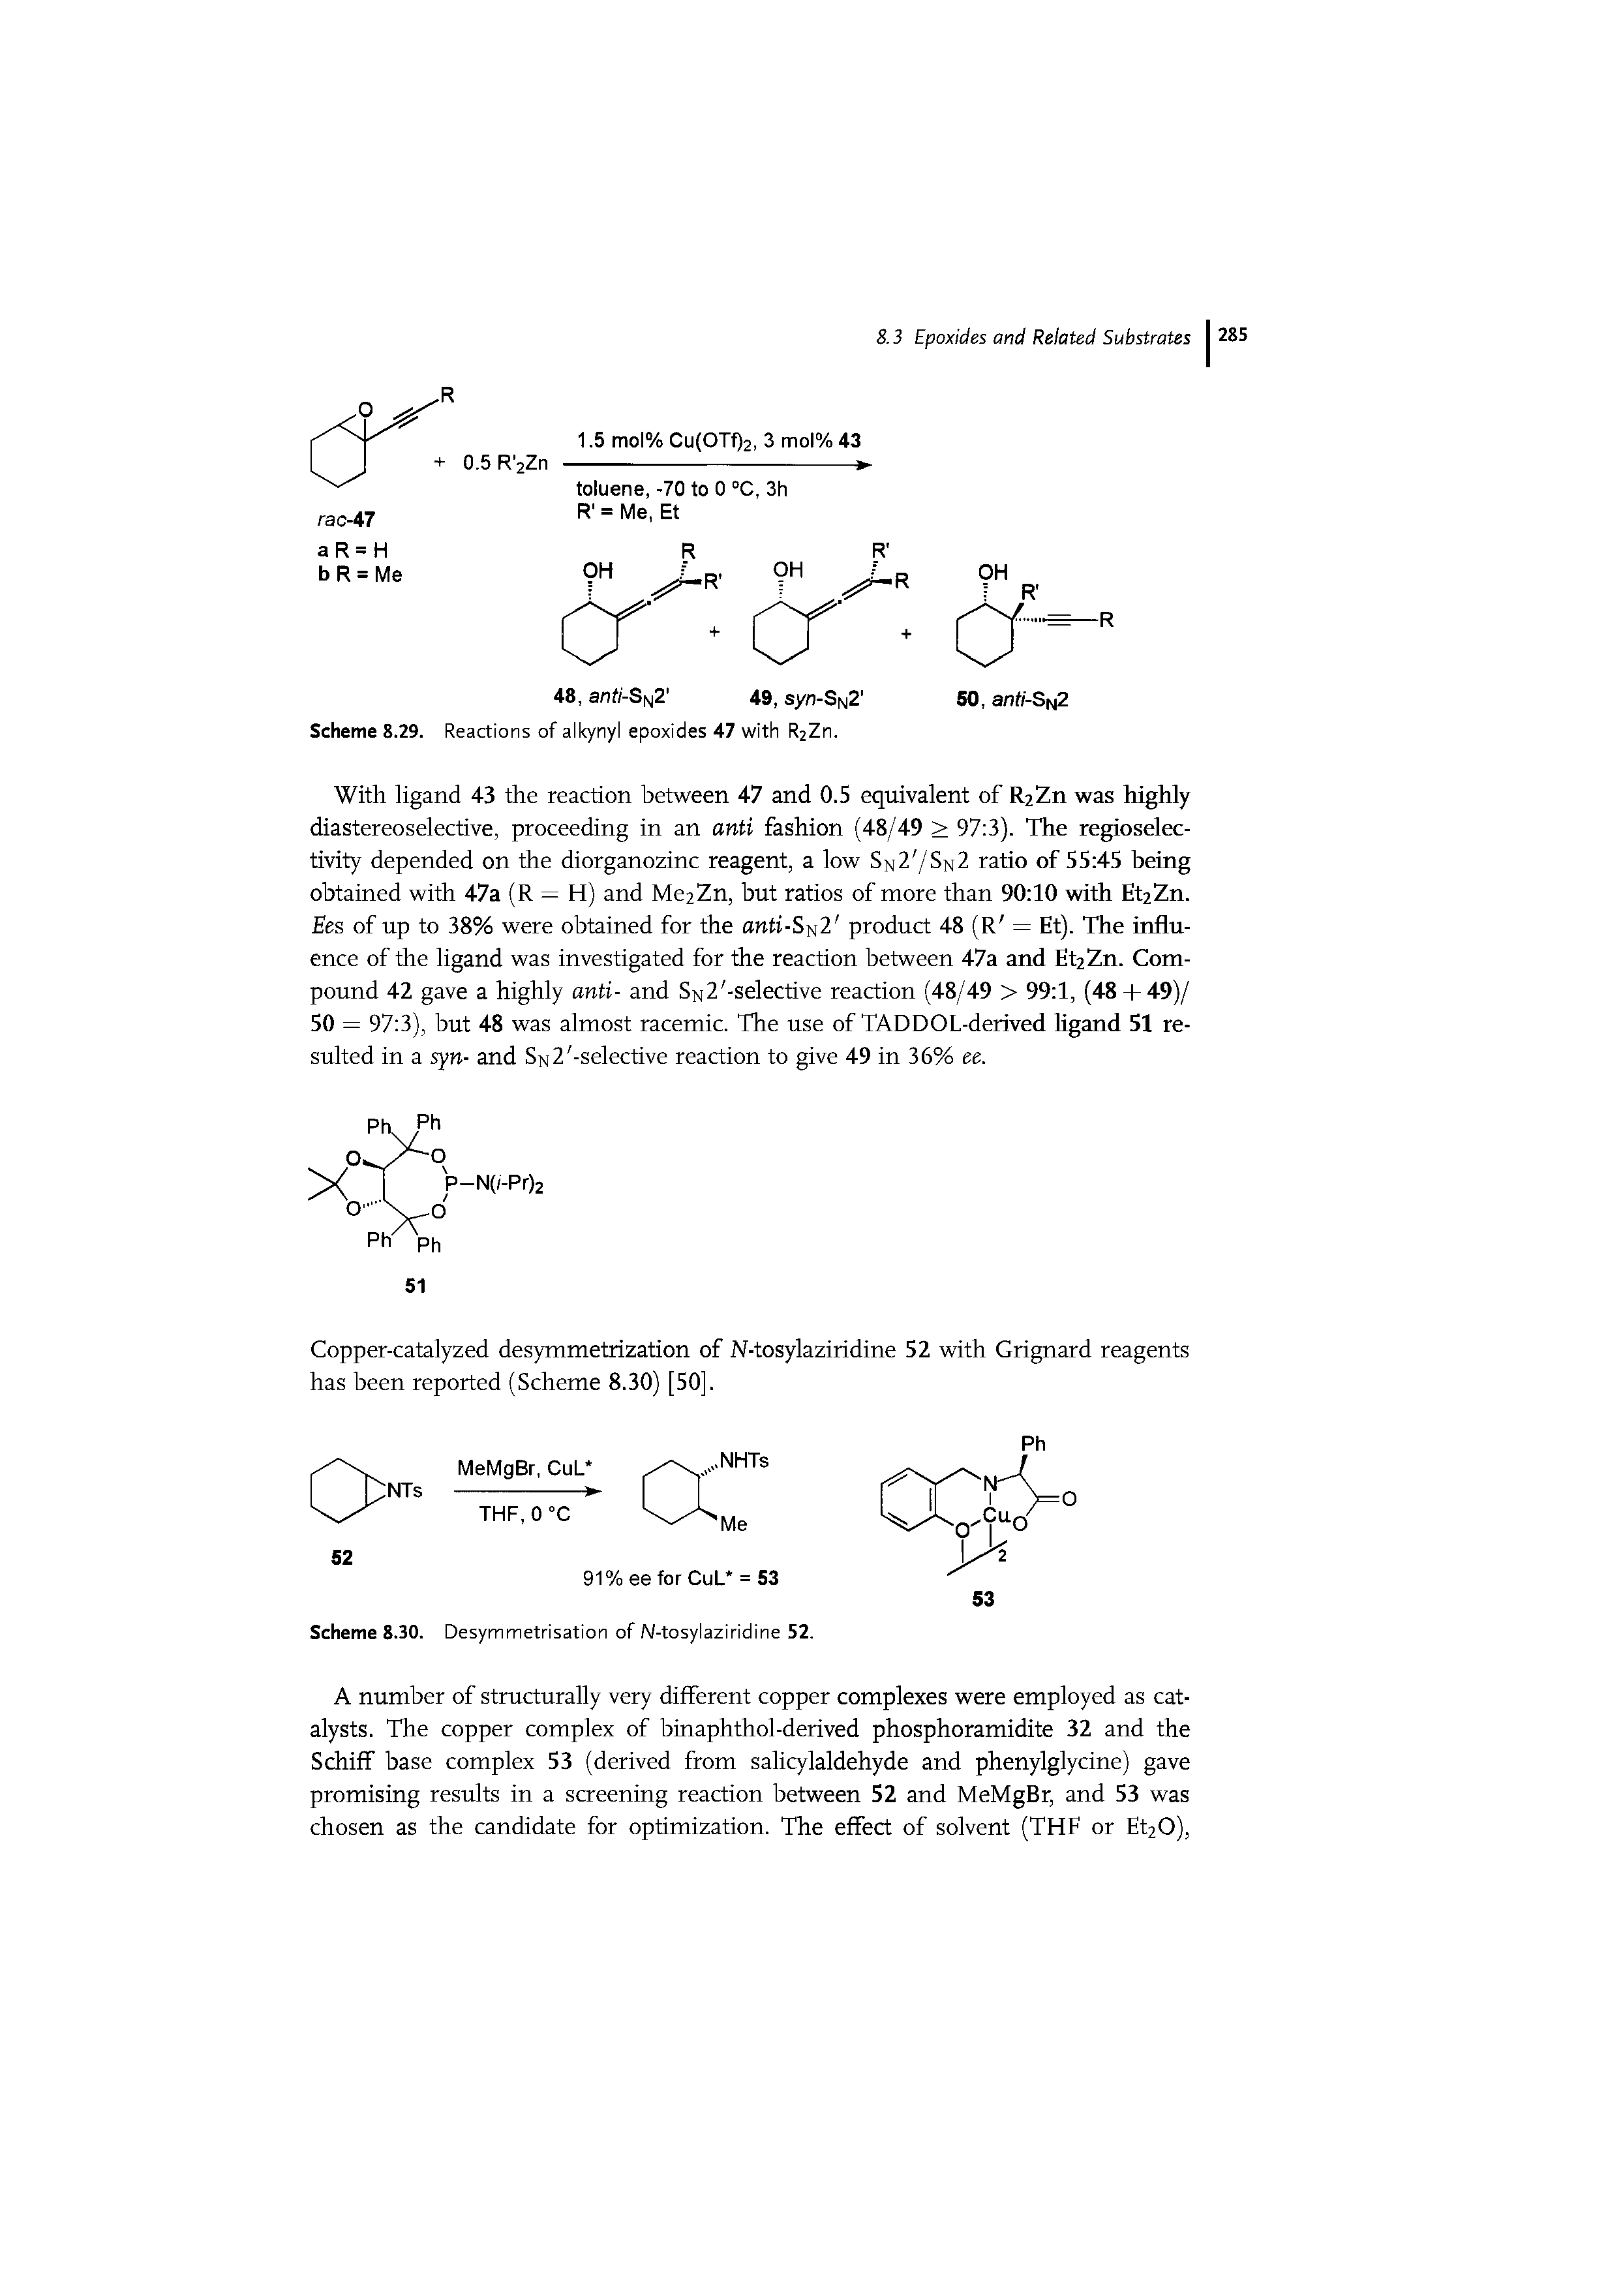 Scheme 8.29. Reactions of alkynyl epoxides 47 with R2Zn.